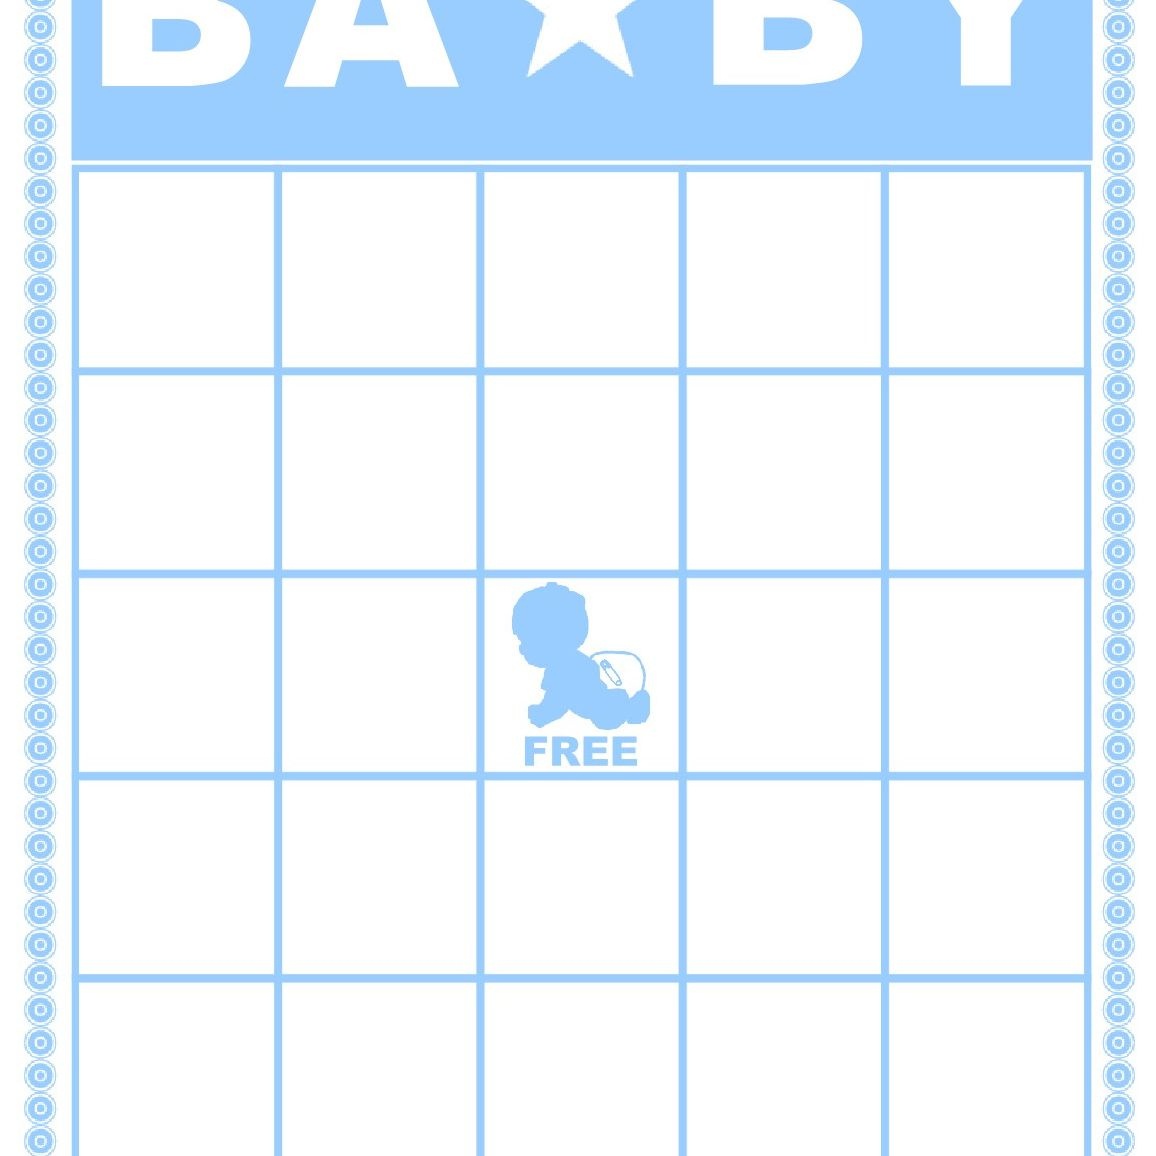 Free Baby Shower Bingo Cards Your Guests Will Love - 50 Free Printable Baby Bingo Cards